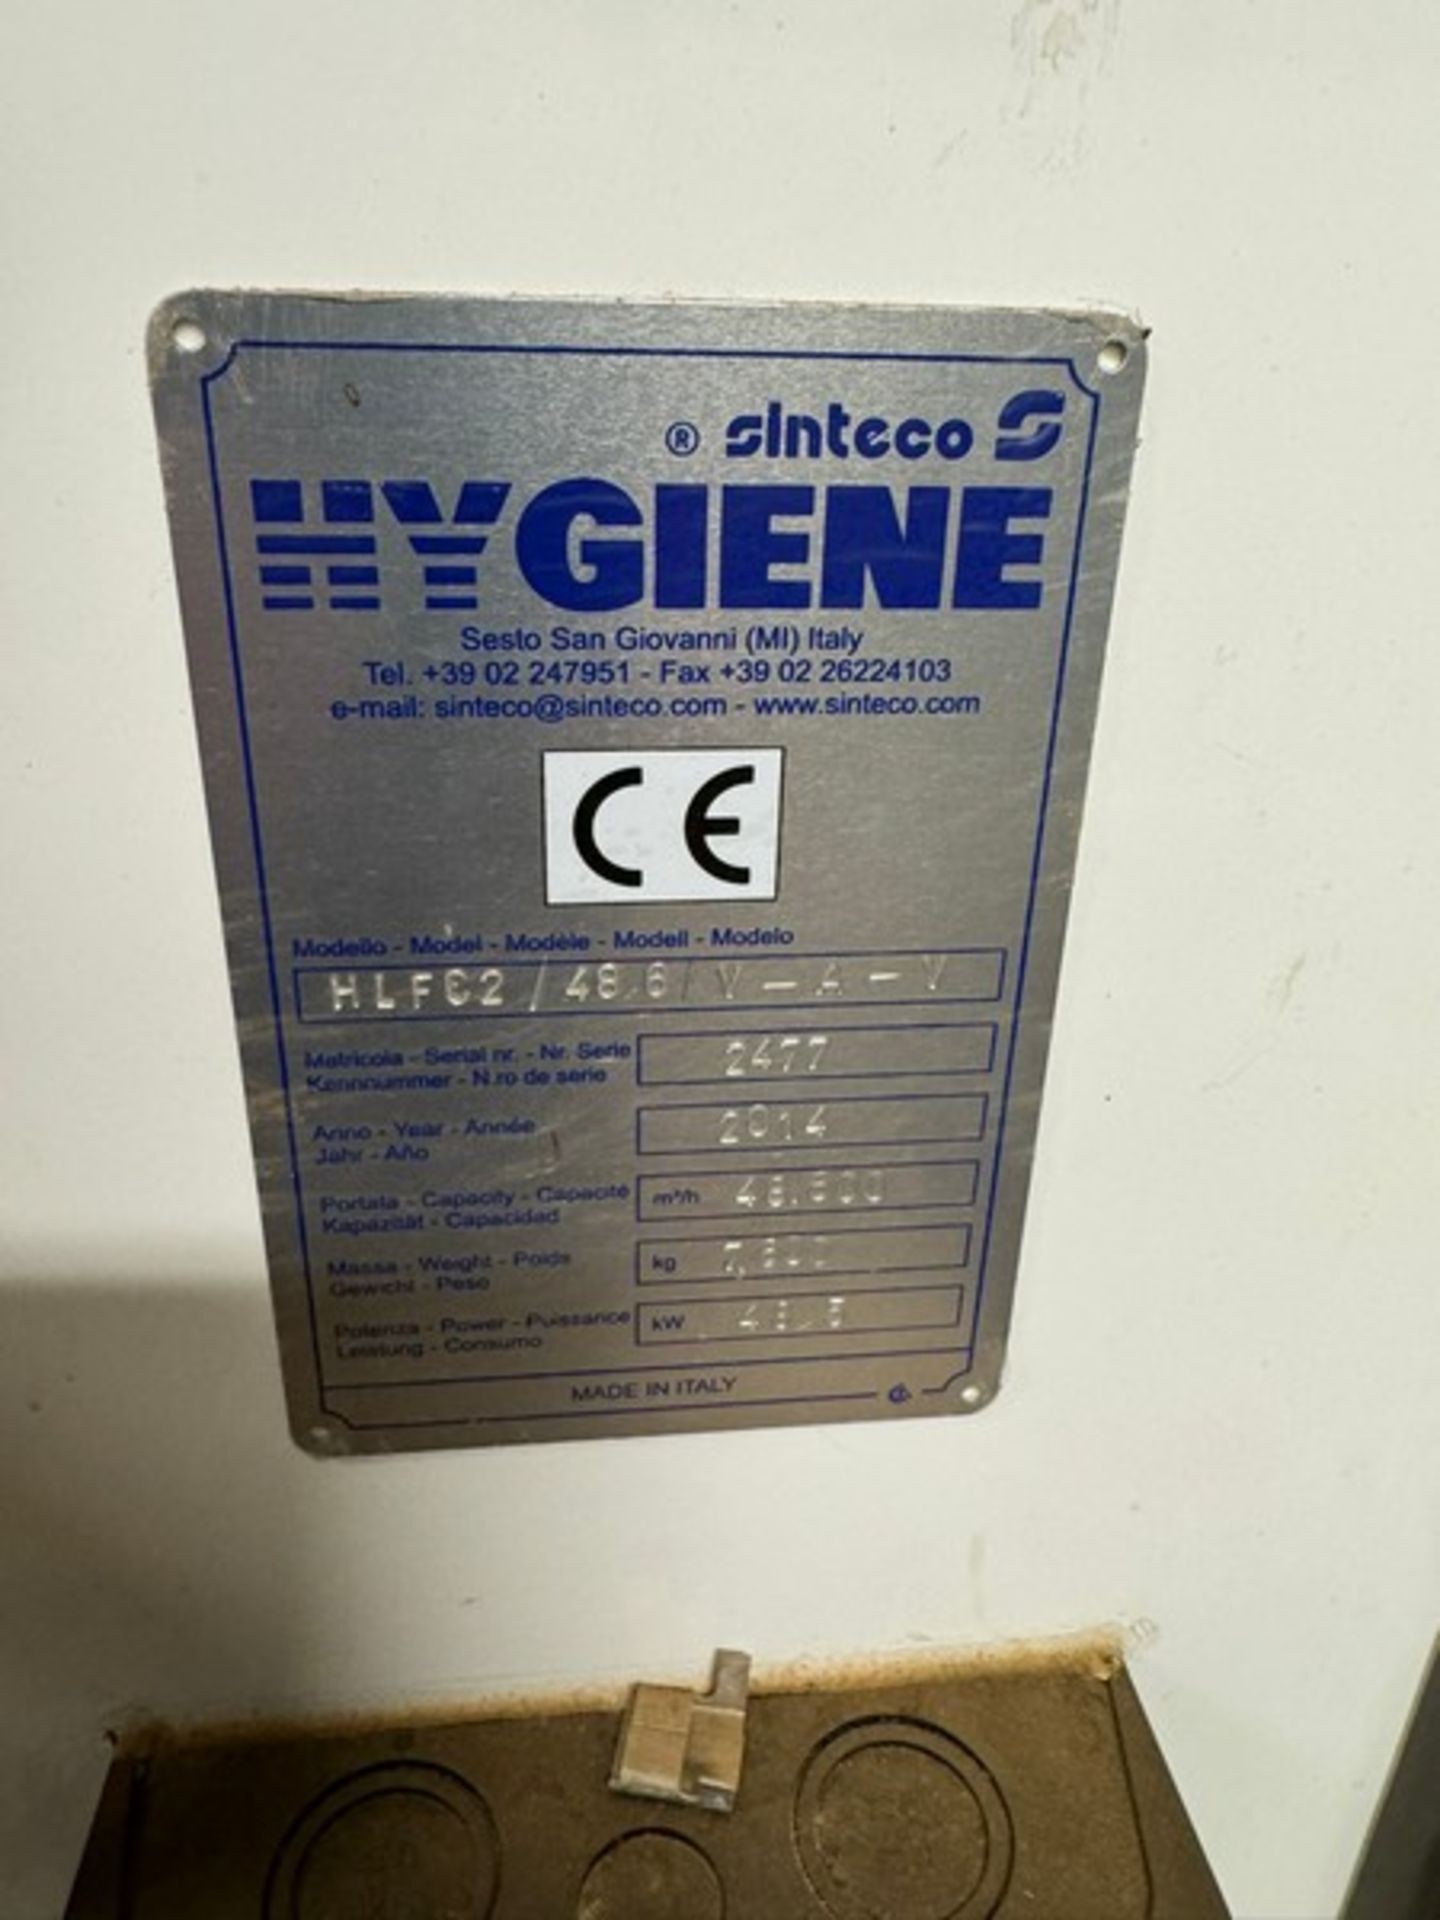 Sinteco Hygiene Air Cleaner, with 3-Door Control Panel (LOCATED IN FREEHOLD, N.J.) - Image 11 of 12